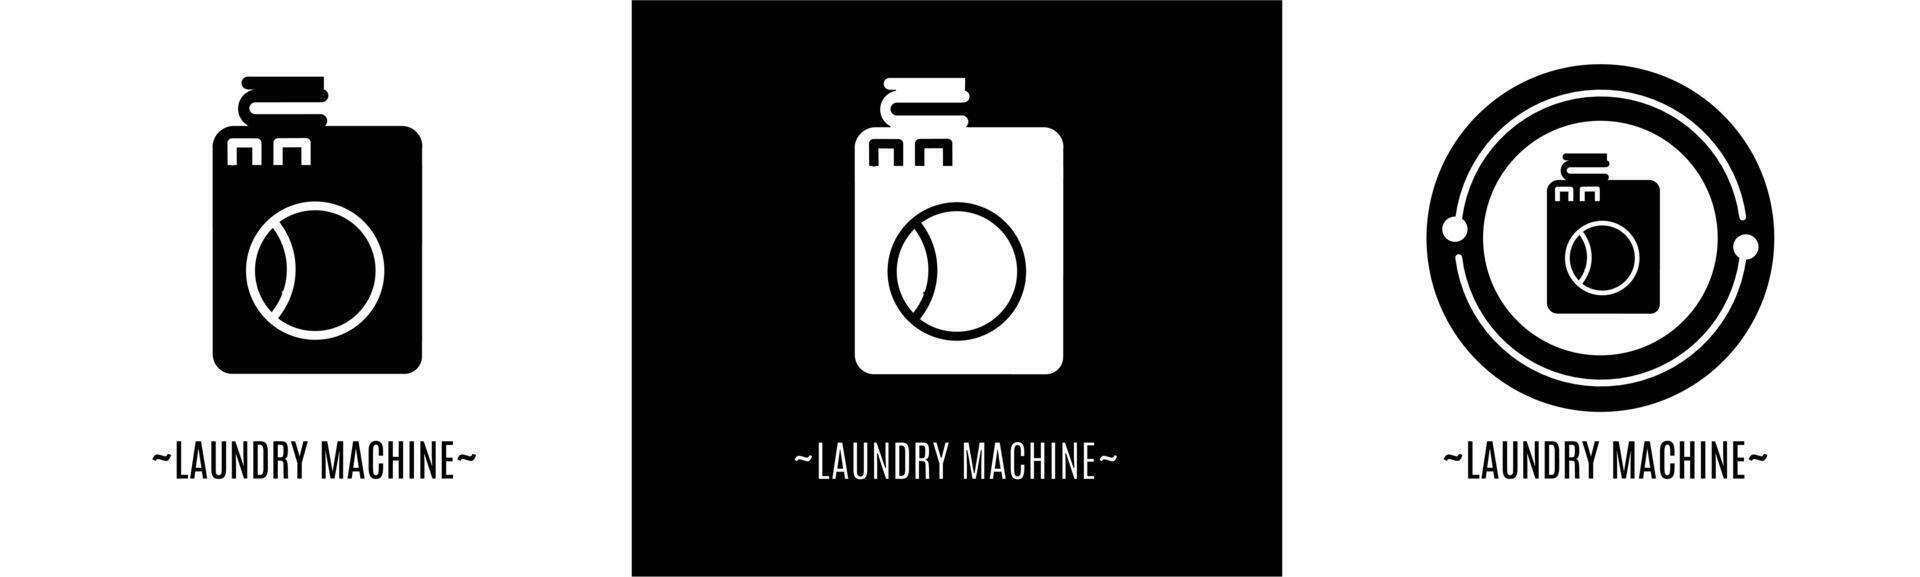 Laundry machine logo set. Collection of black and white logos. Stock vector. vector